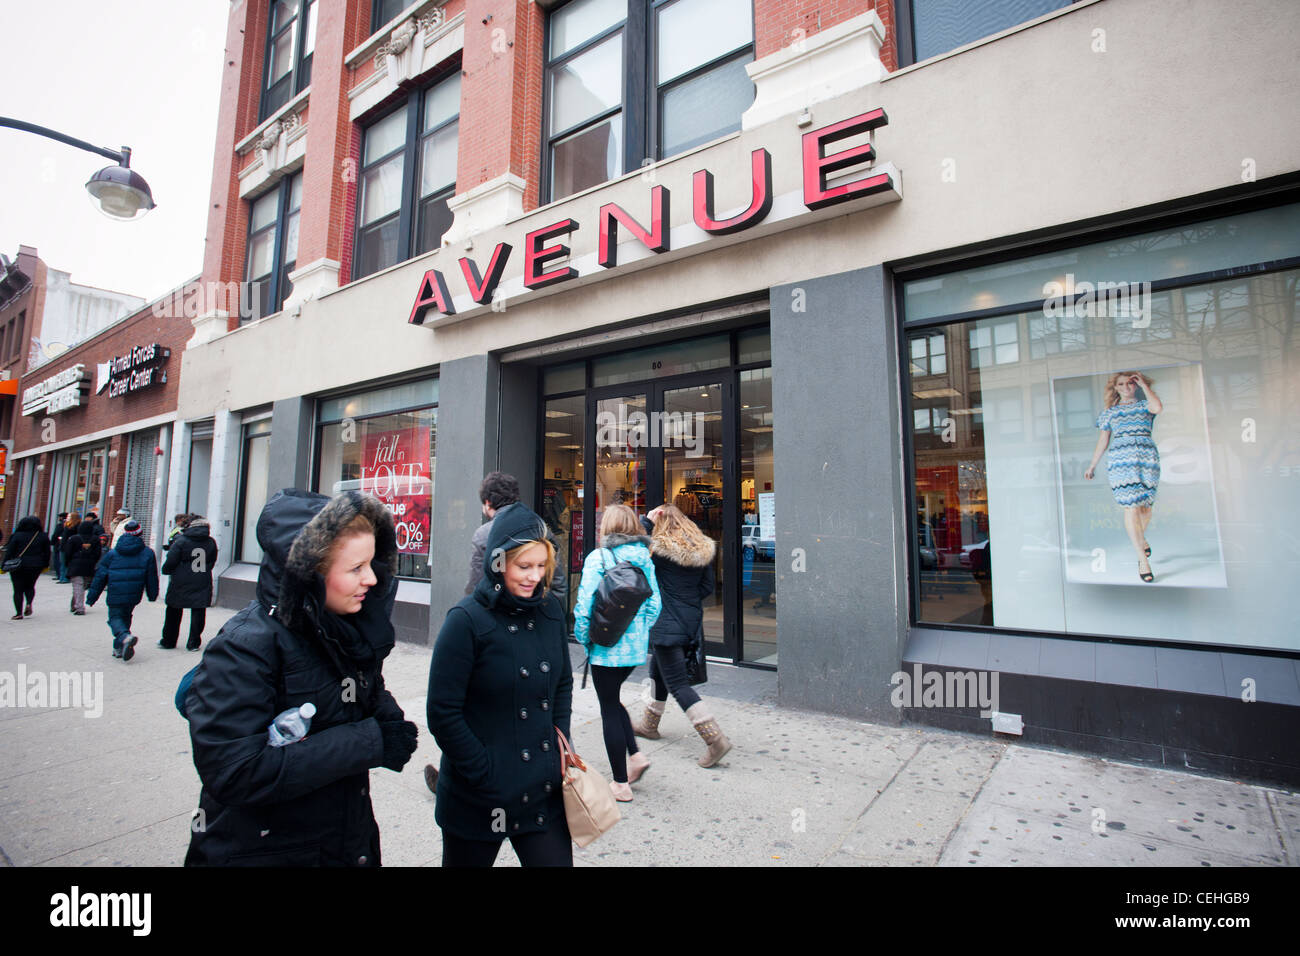 An Avenue plus size women's clothing store in the 125th Street Stock Photo  - Alamy